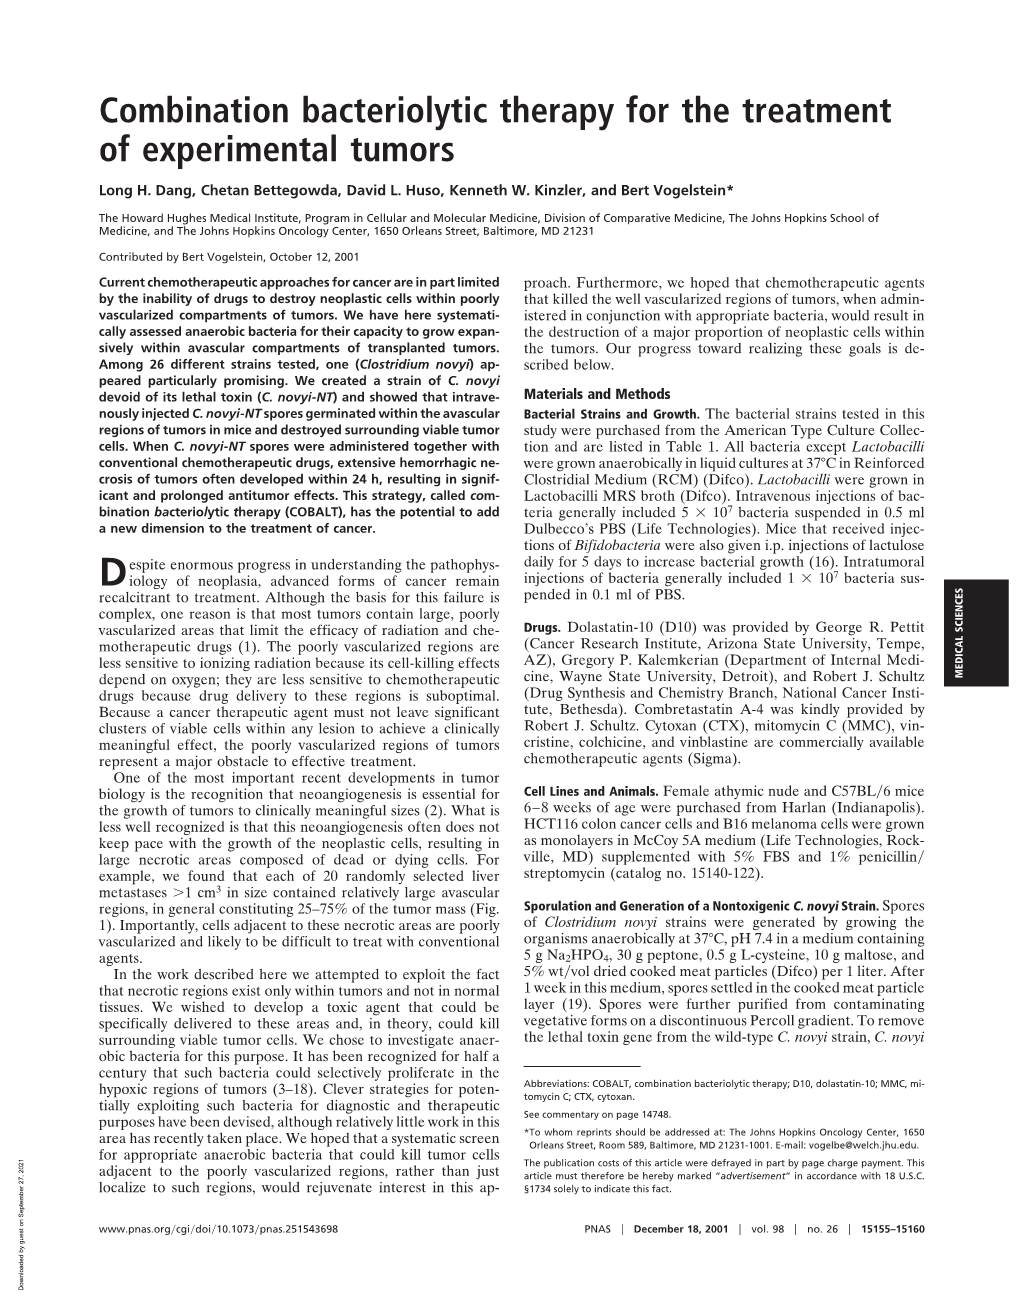 Combination Bacteriolytic Therapy for the Treatment of Experimental Tumors